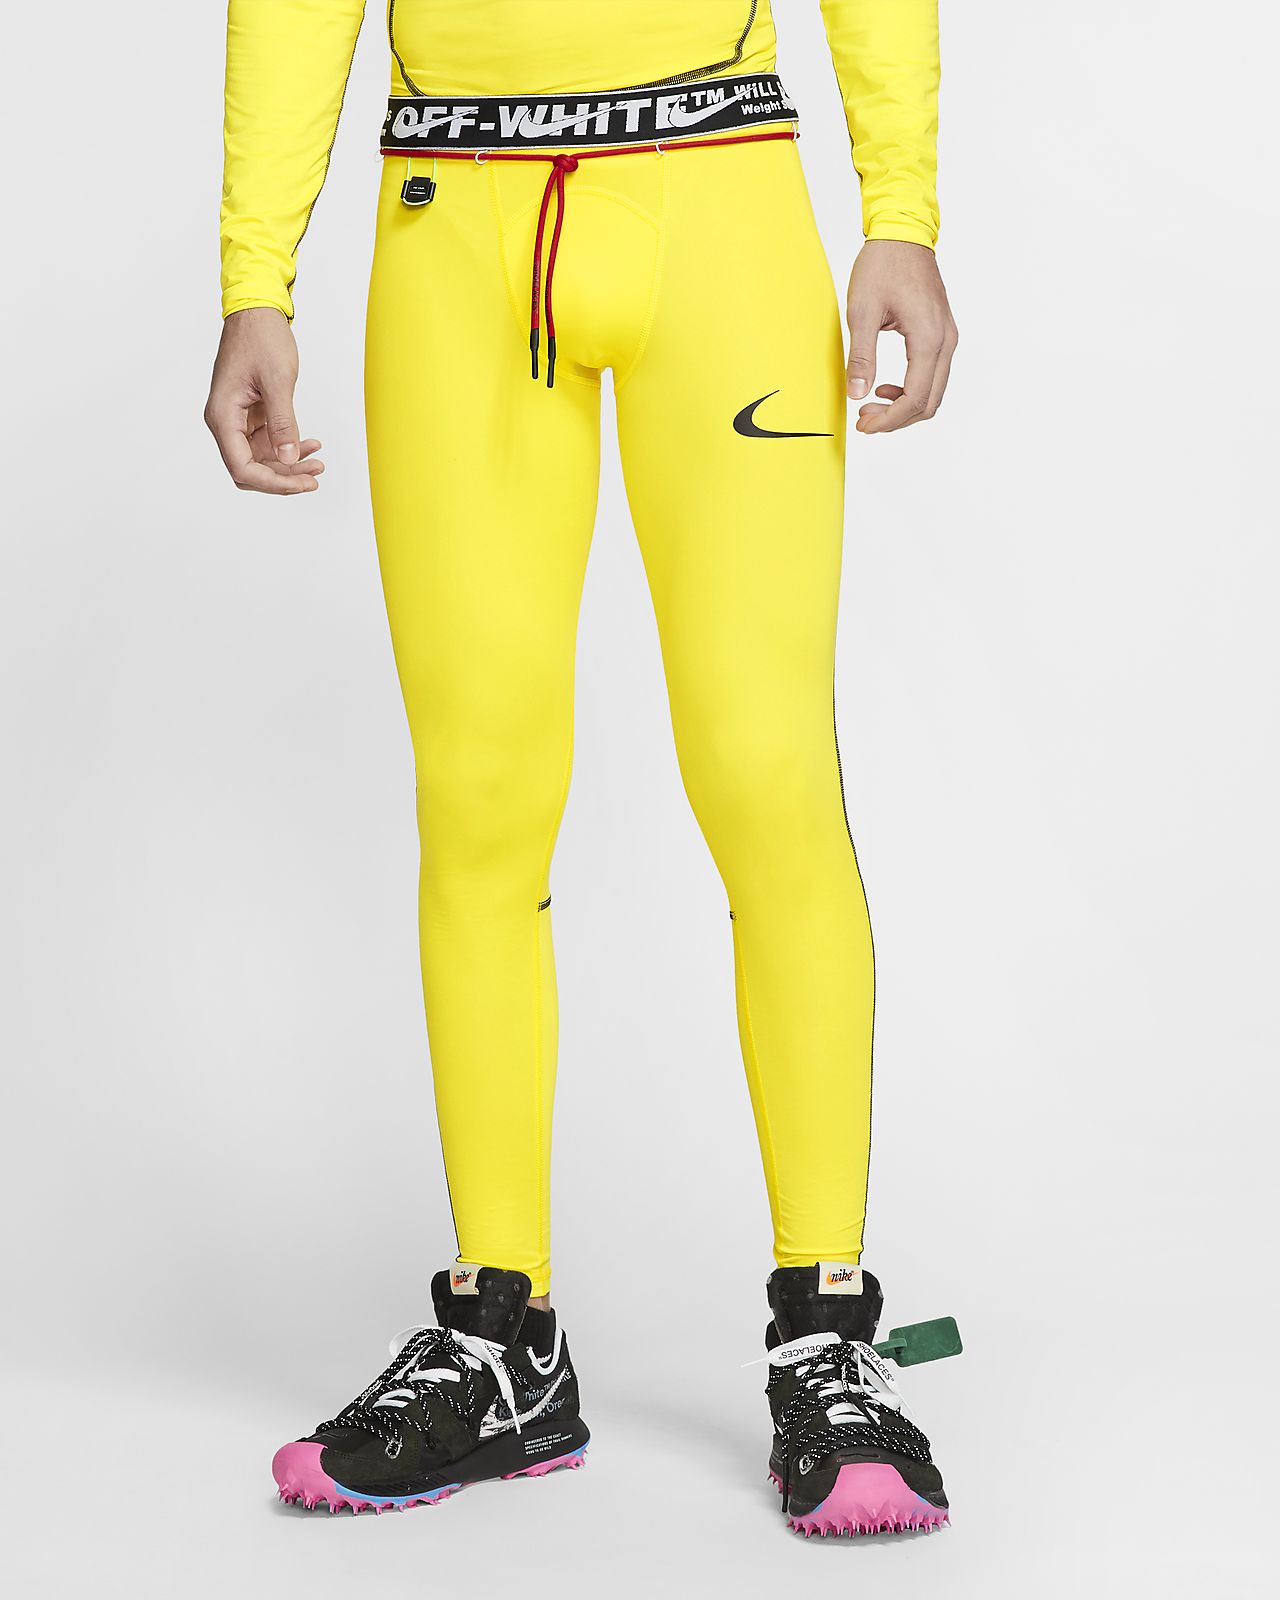 yellow and black nike outfit